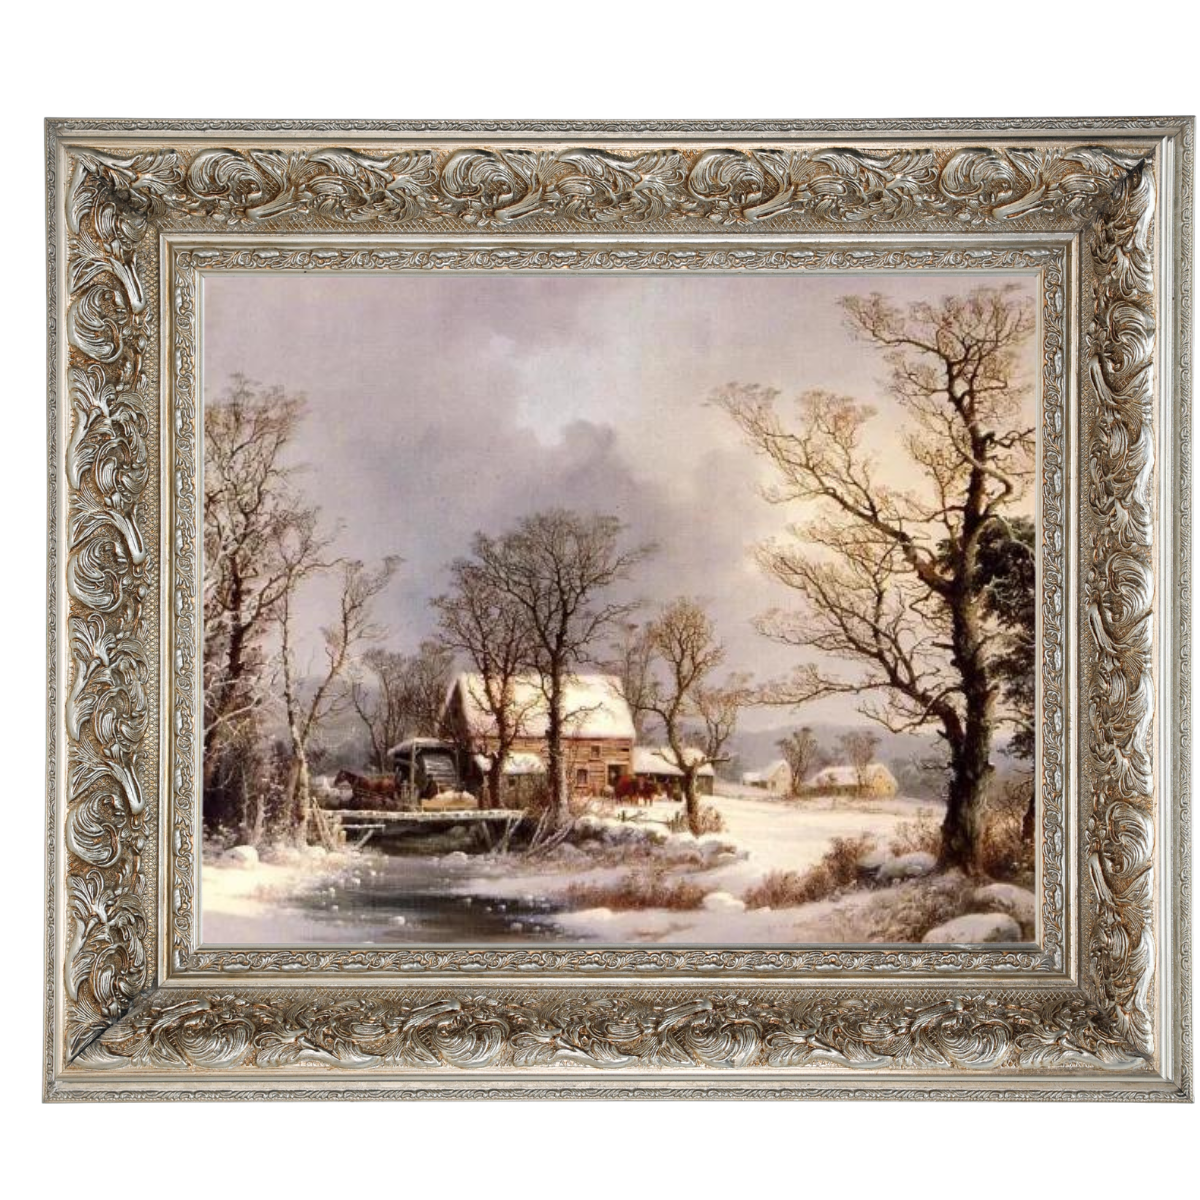 Winter in the Country, The Old Grist Mill-Vintage Wall Art Prints Decor For Living Room